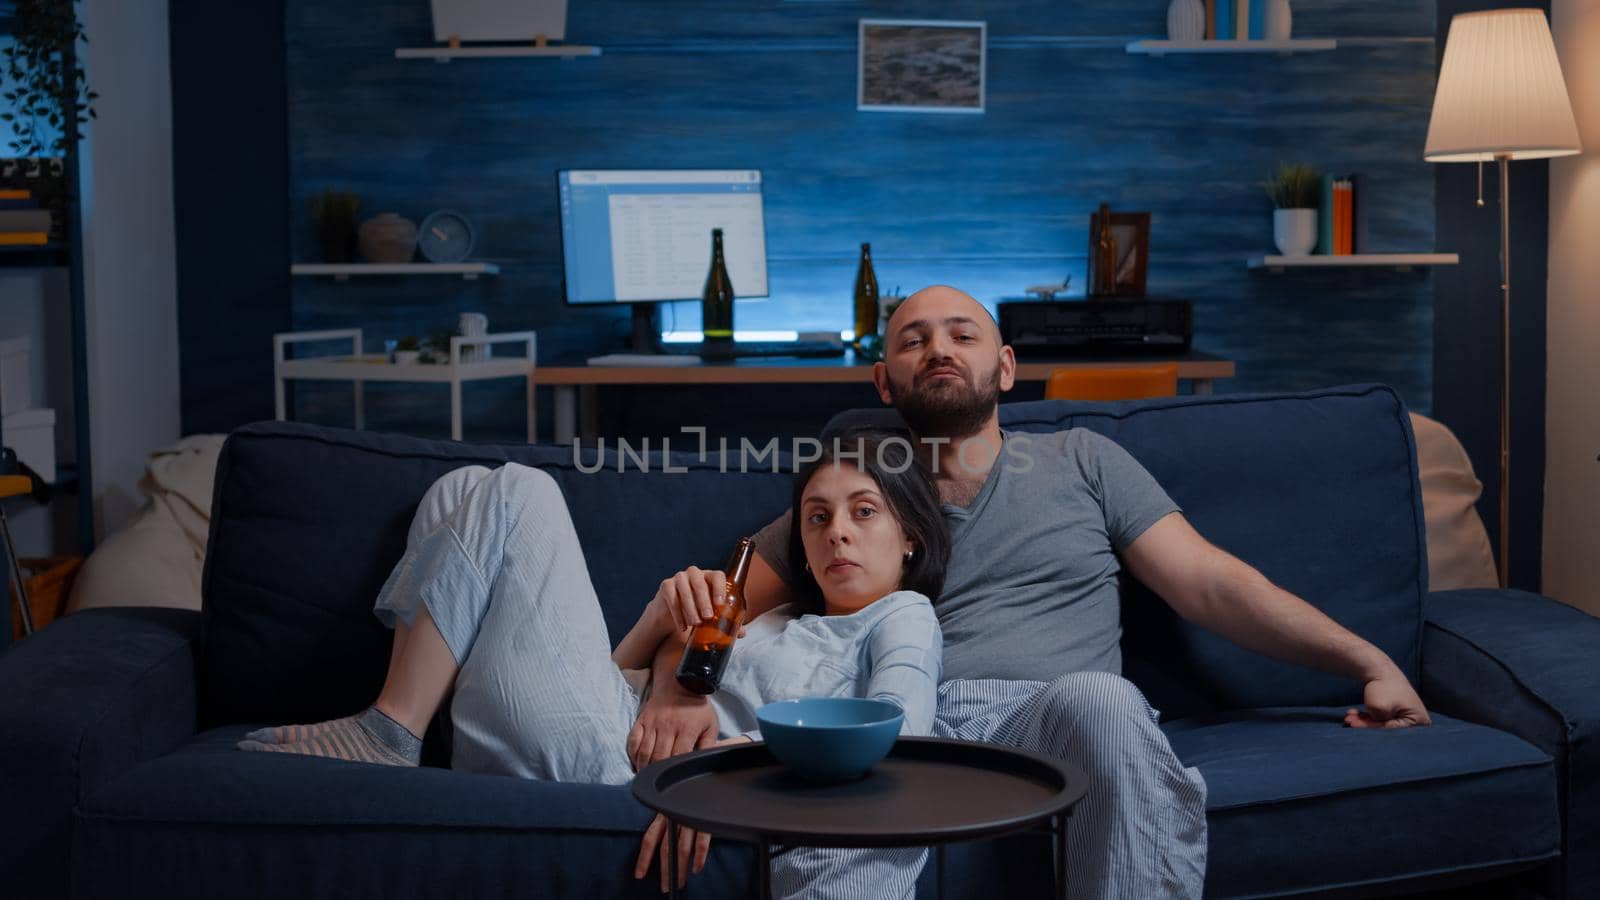 Relax couple in pajamas sitting on sofa eating popcorn watching TV, enjoying free time together looking at entertainment show sitting on confortable couch. Husband and wife relaxing with comedy movie